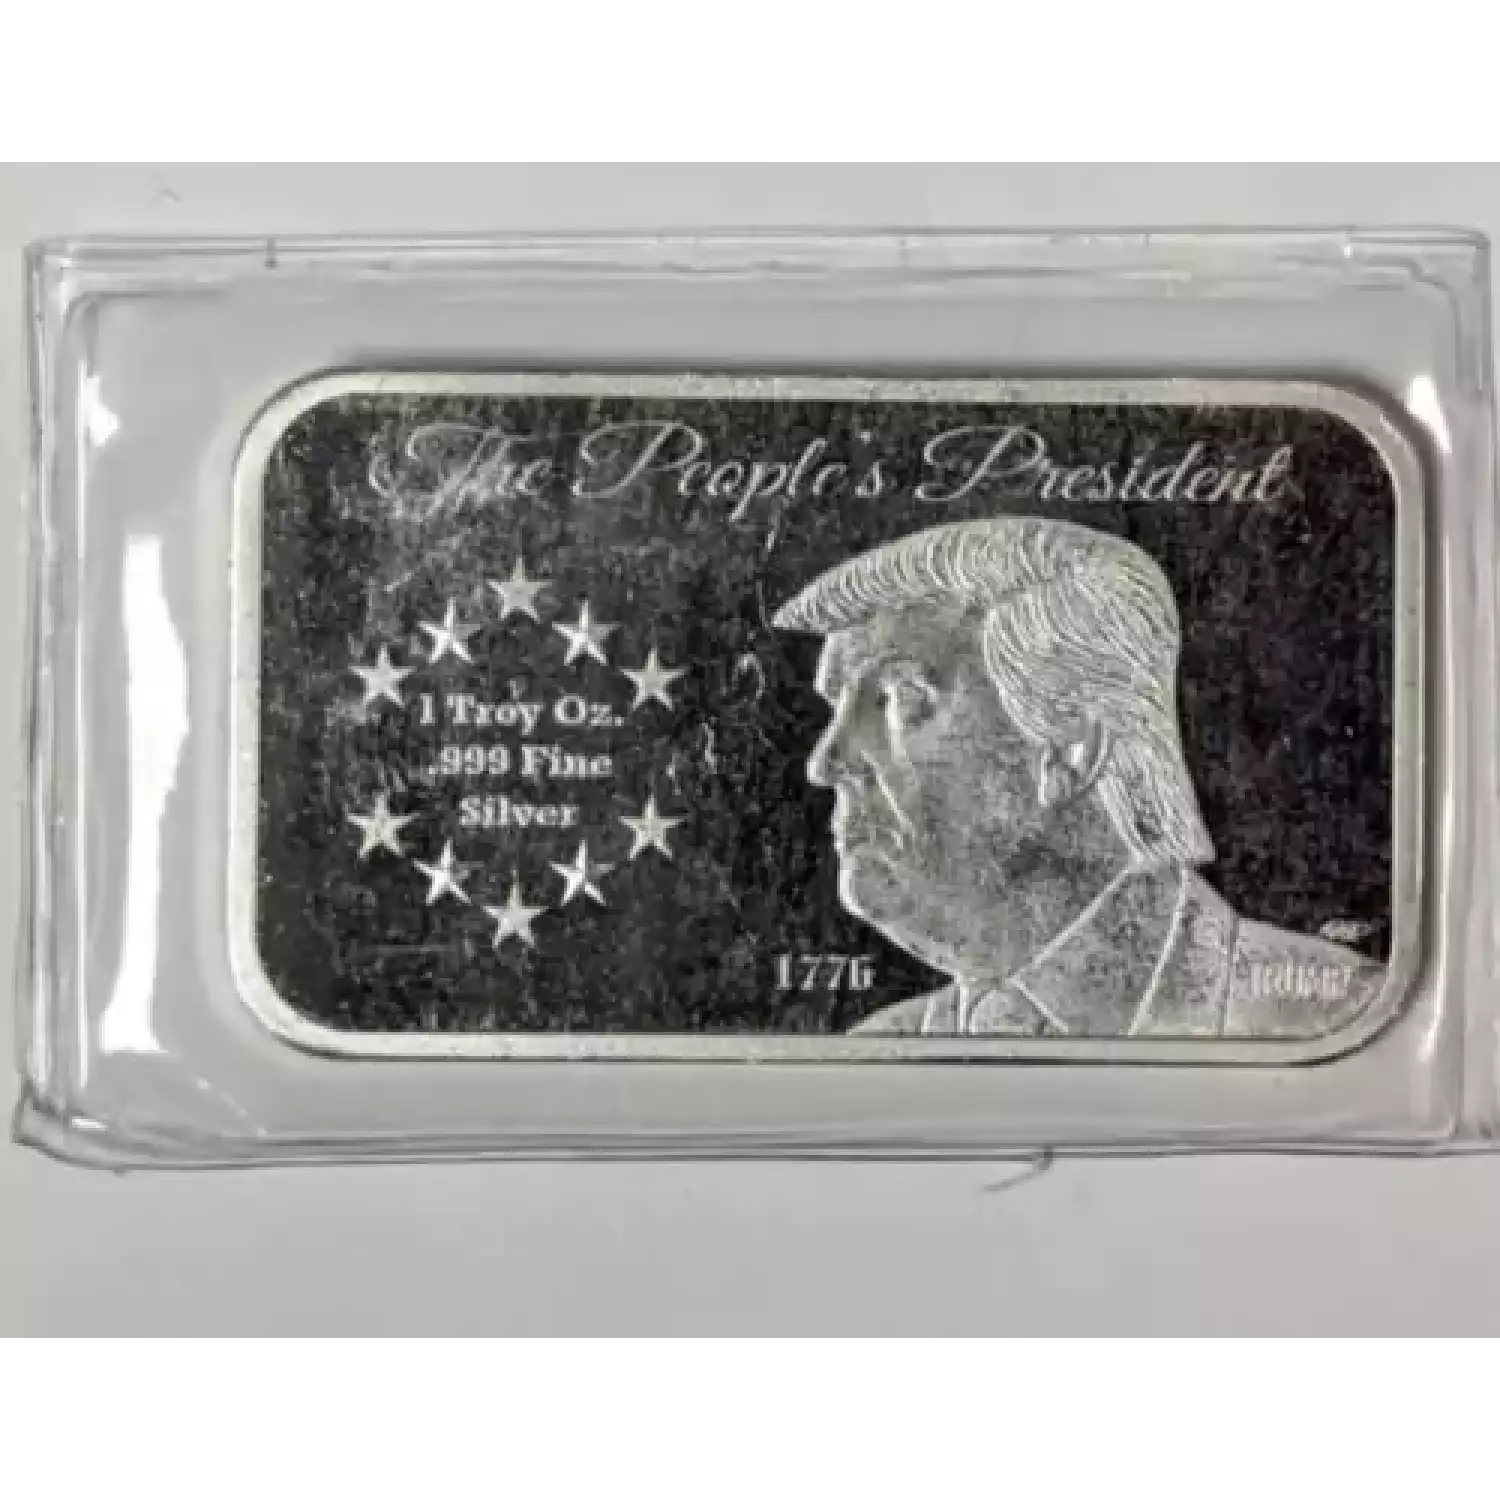 Donald Trump 1 oz .999 Silver Bar - The People's President (2)